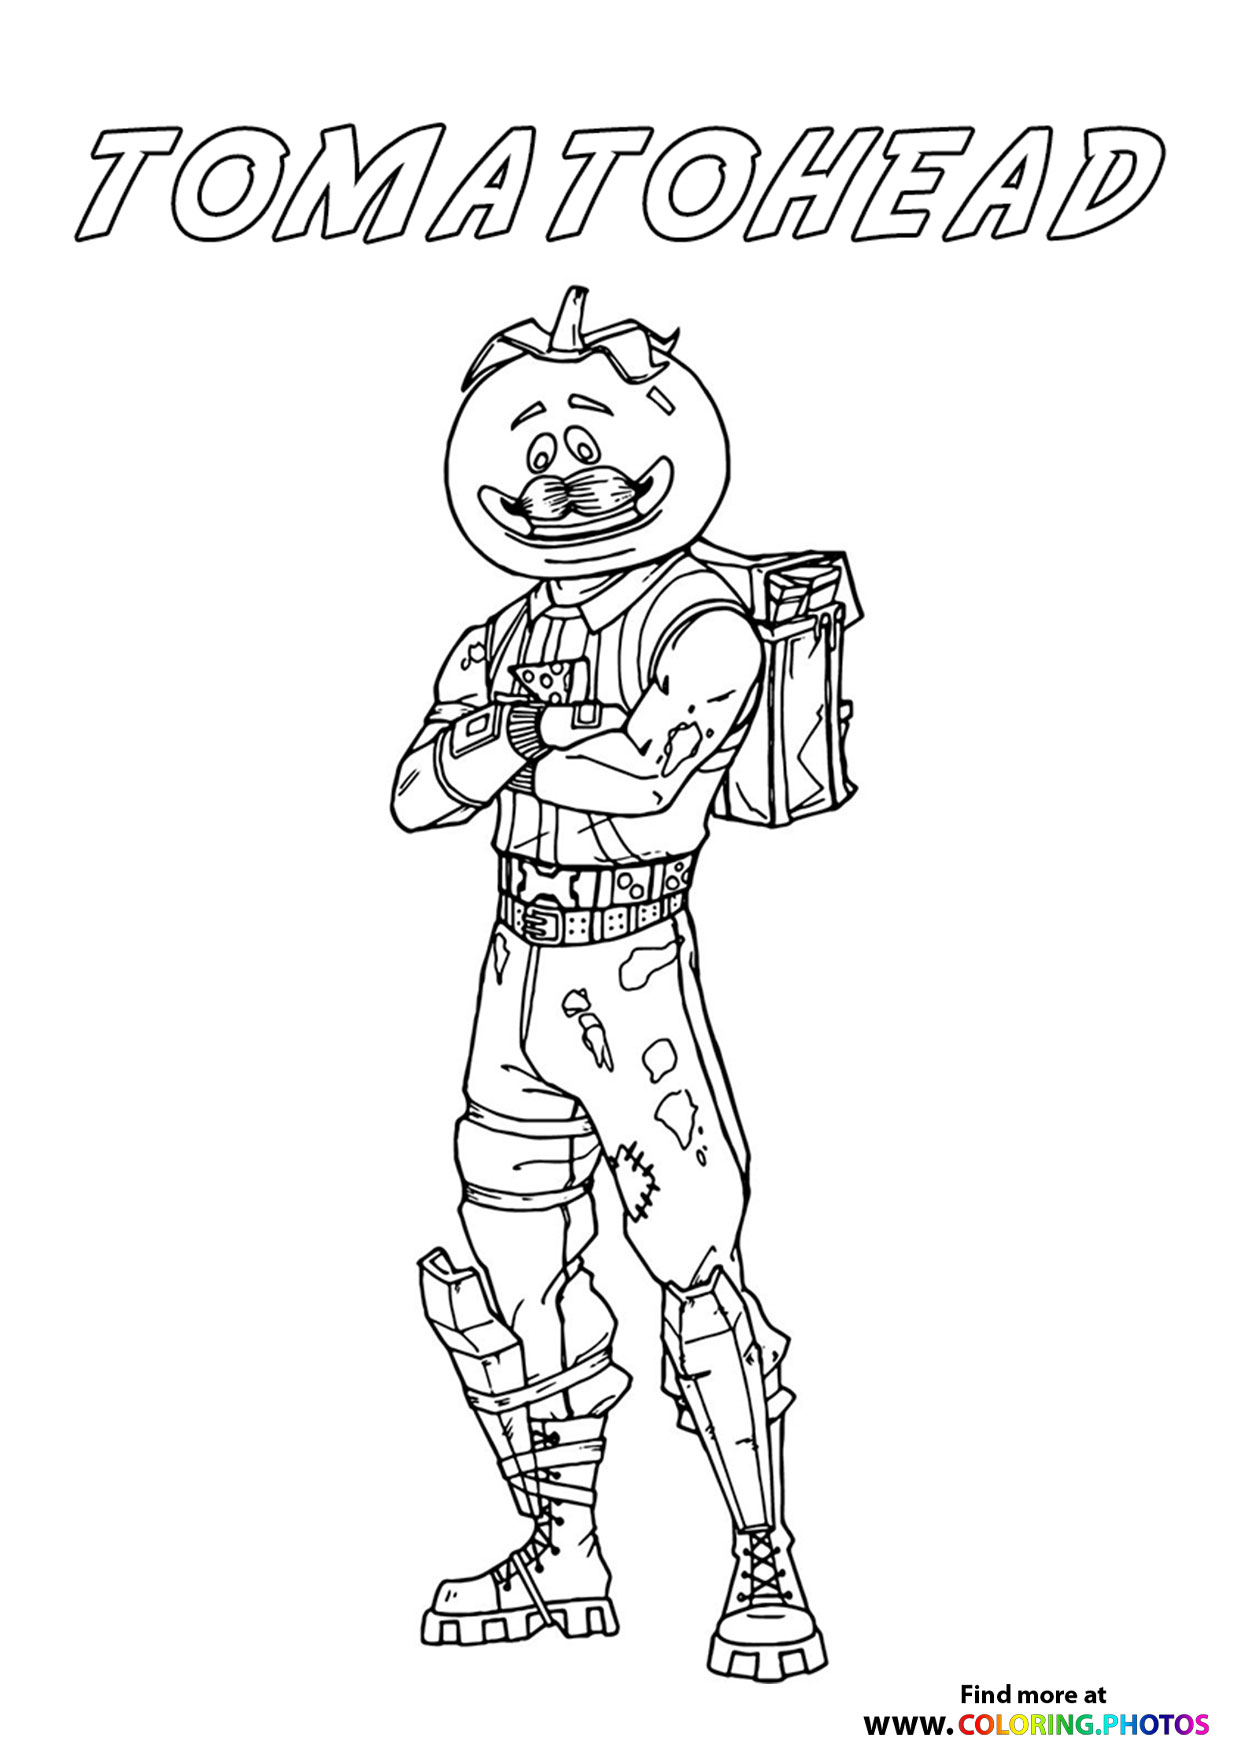 Fortnite Tomatohead Chibi Coloring Page Coloring Page Central Images